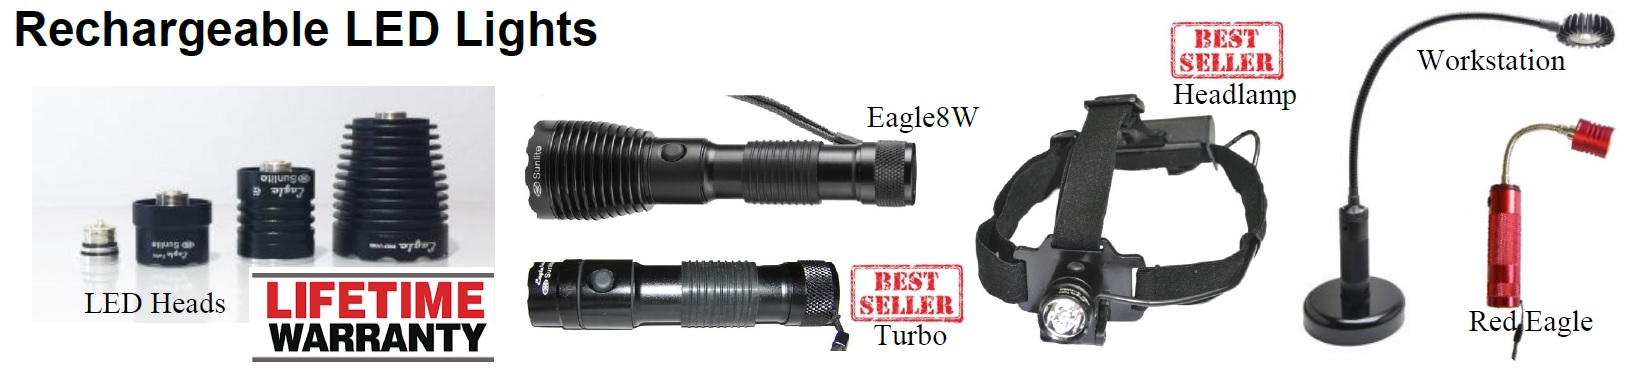 SST Rechargeable Flashlight